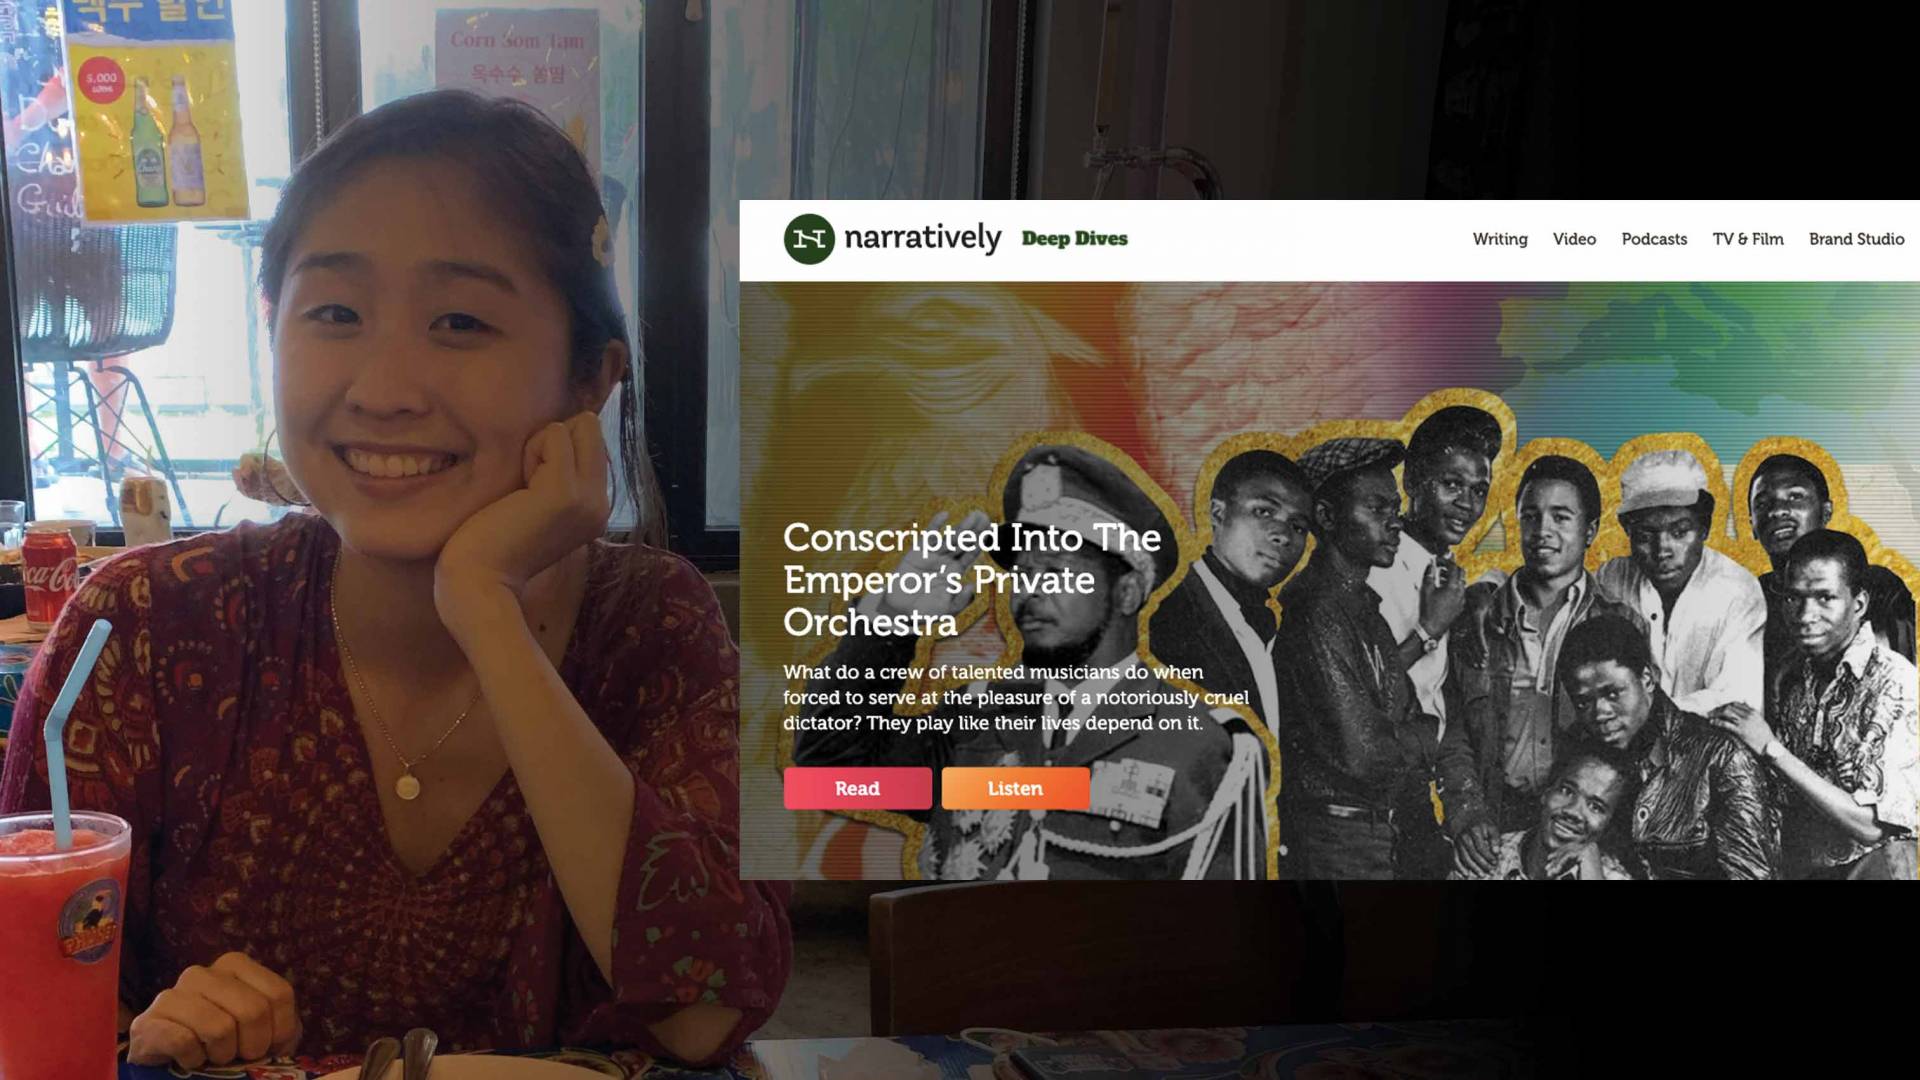 Jimin Kang and a scheetshot of her editorial work at Narratively